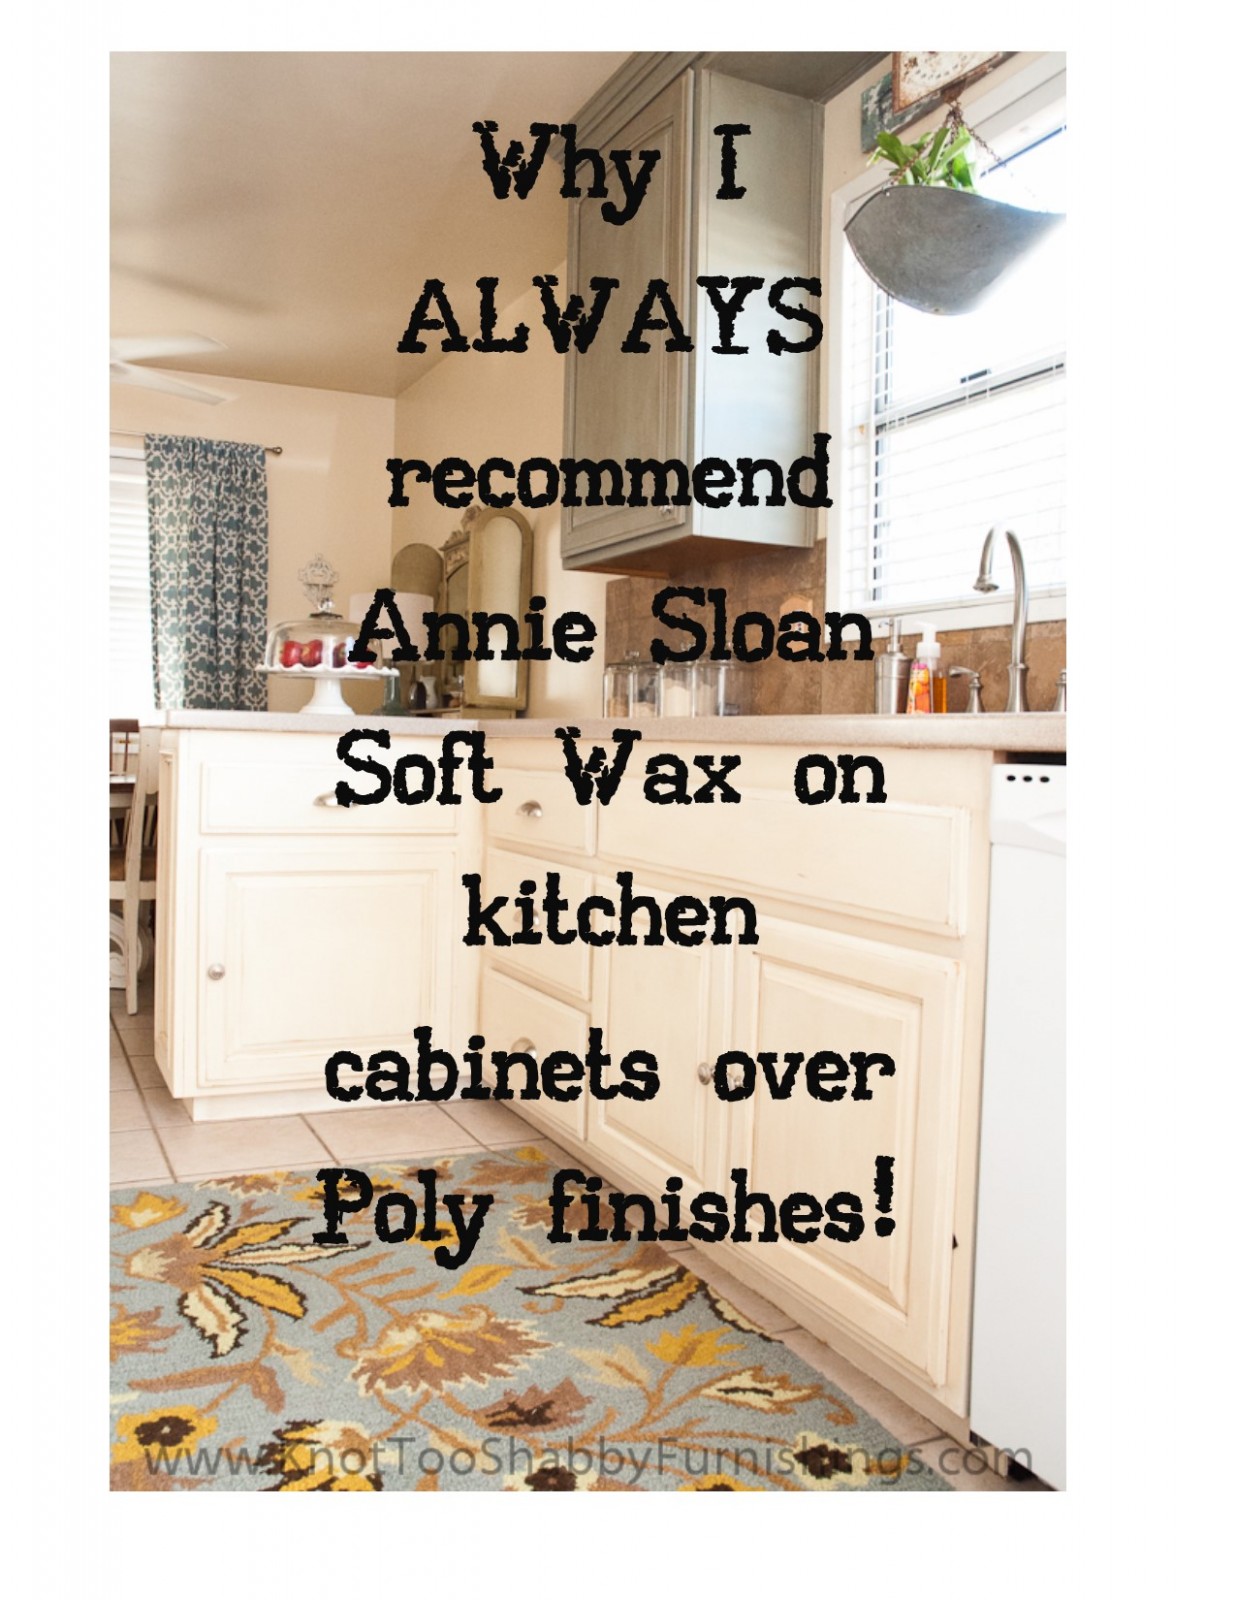 Why Would I Use Annie Sloan Paint On My Kitchen Cabinets” | Knot ..